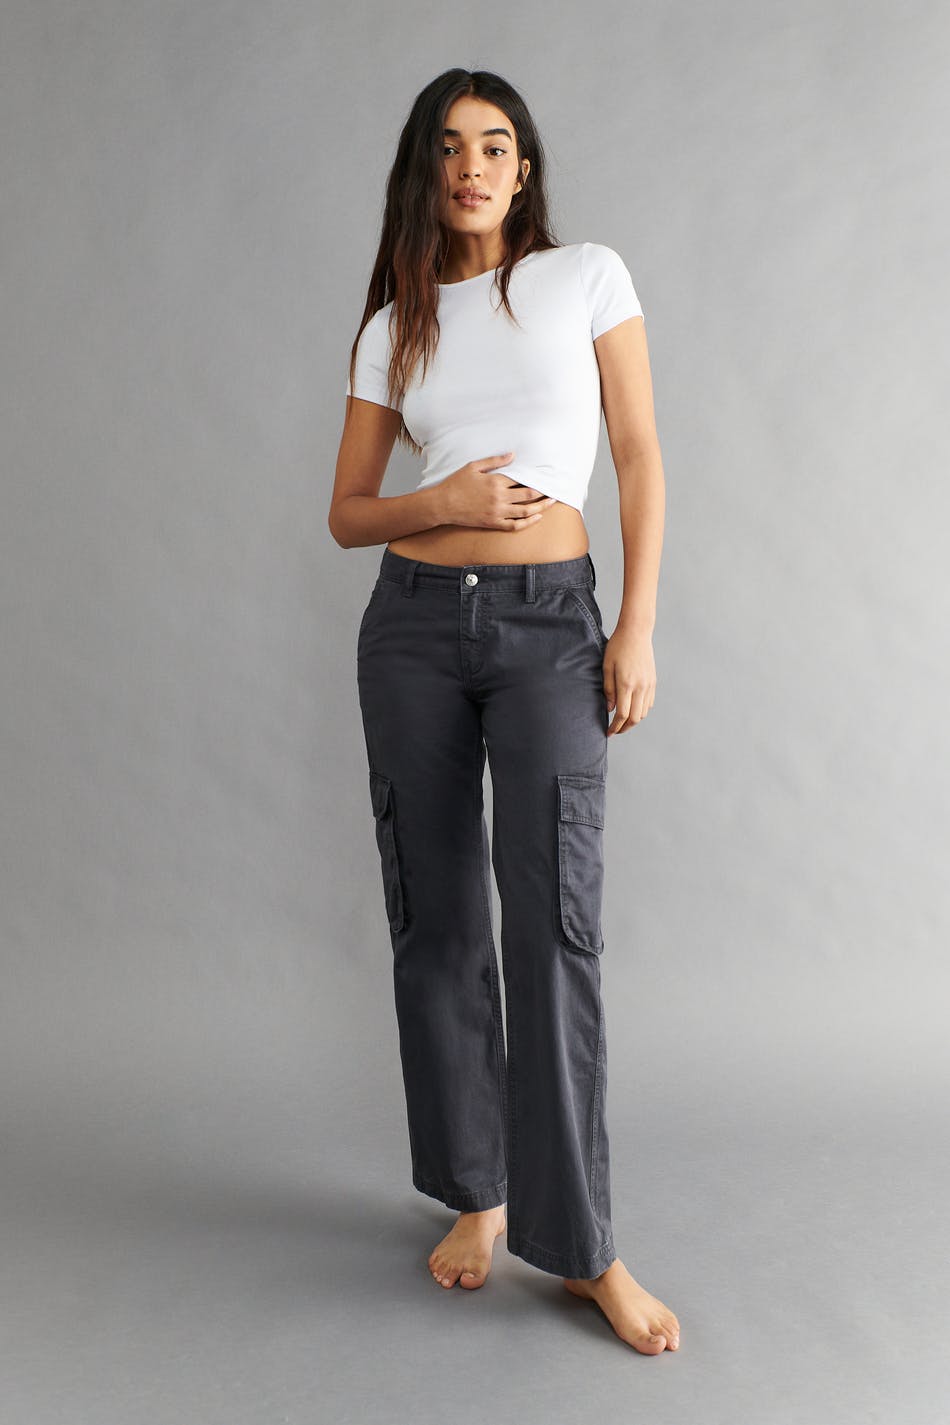 Low waisted jeans for women - Gina Tricot